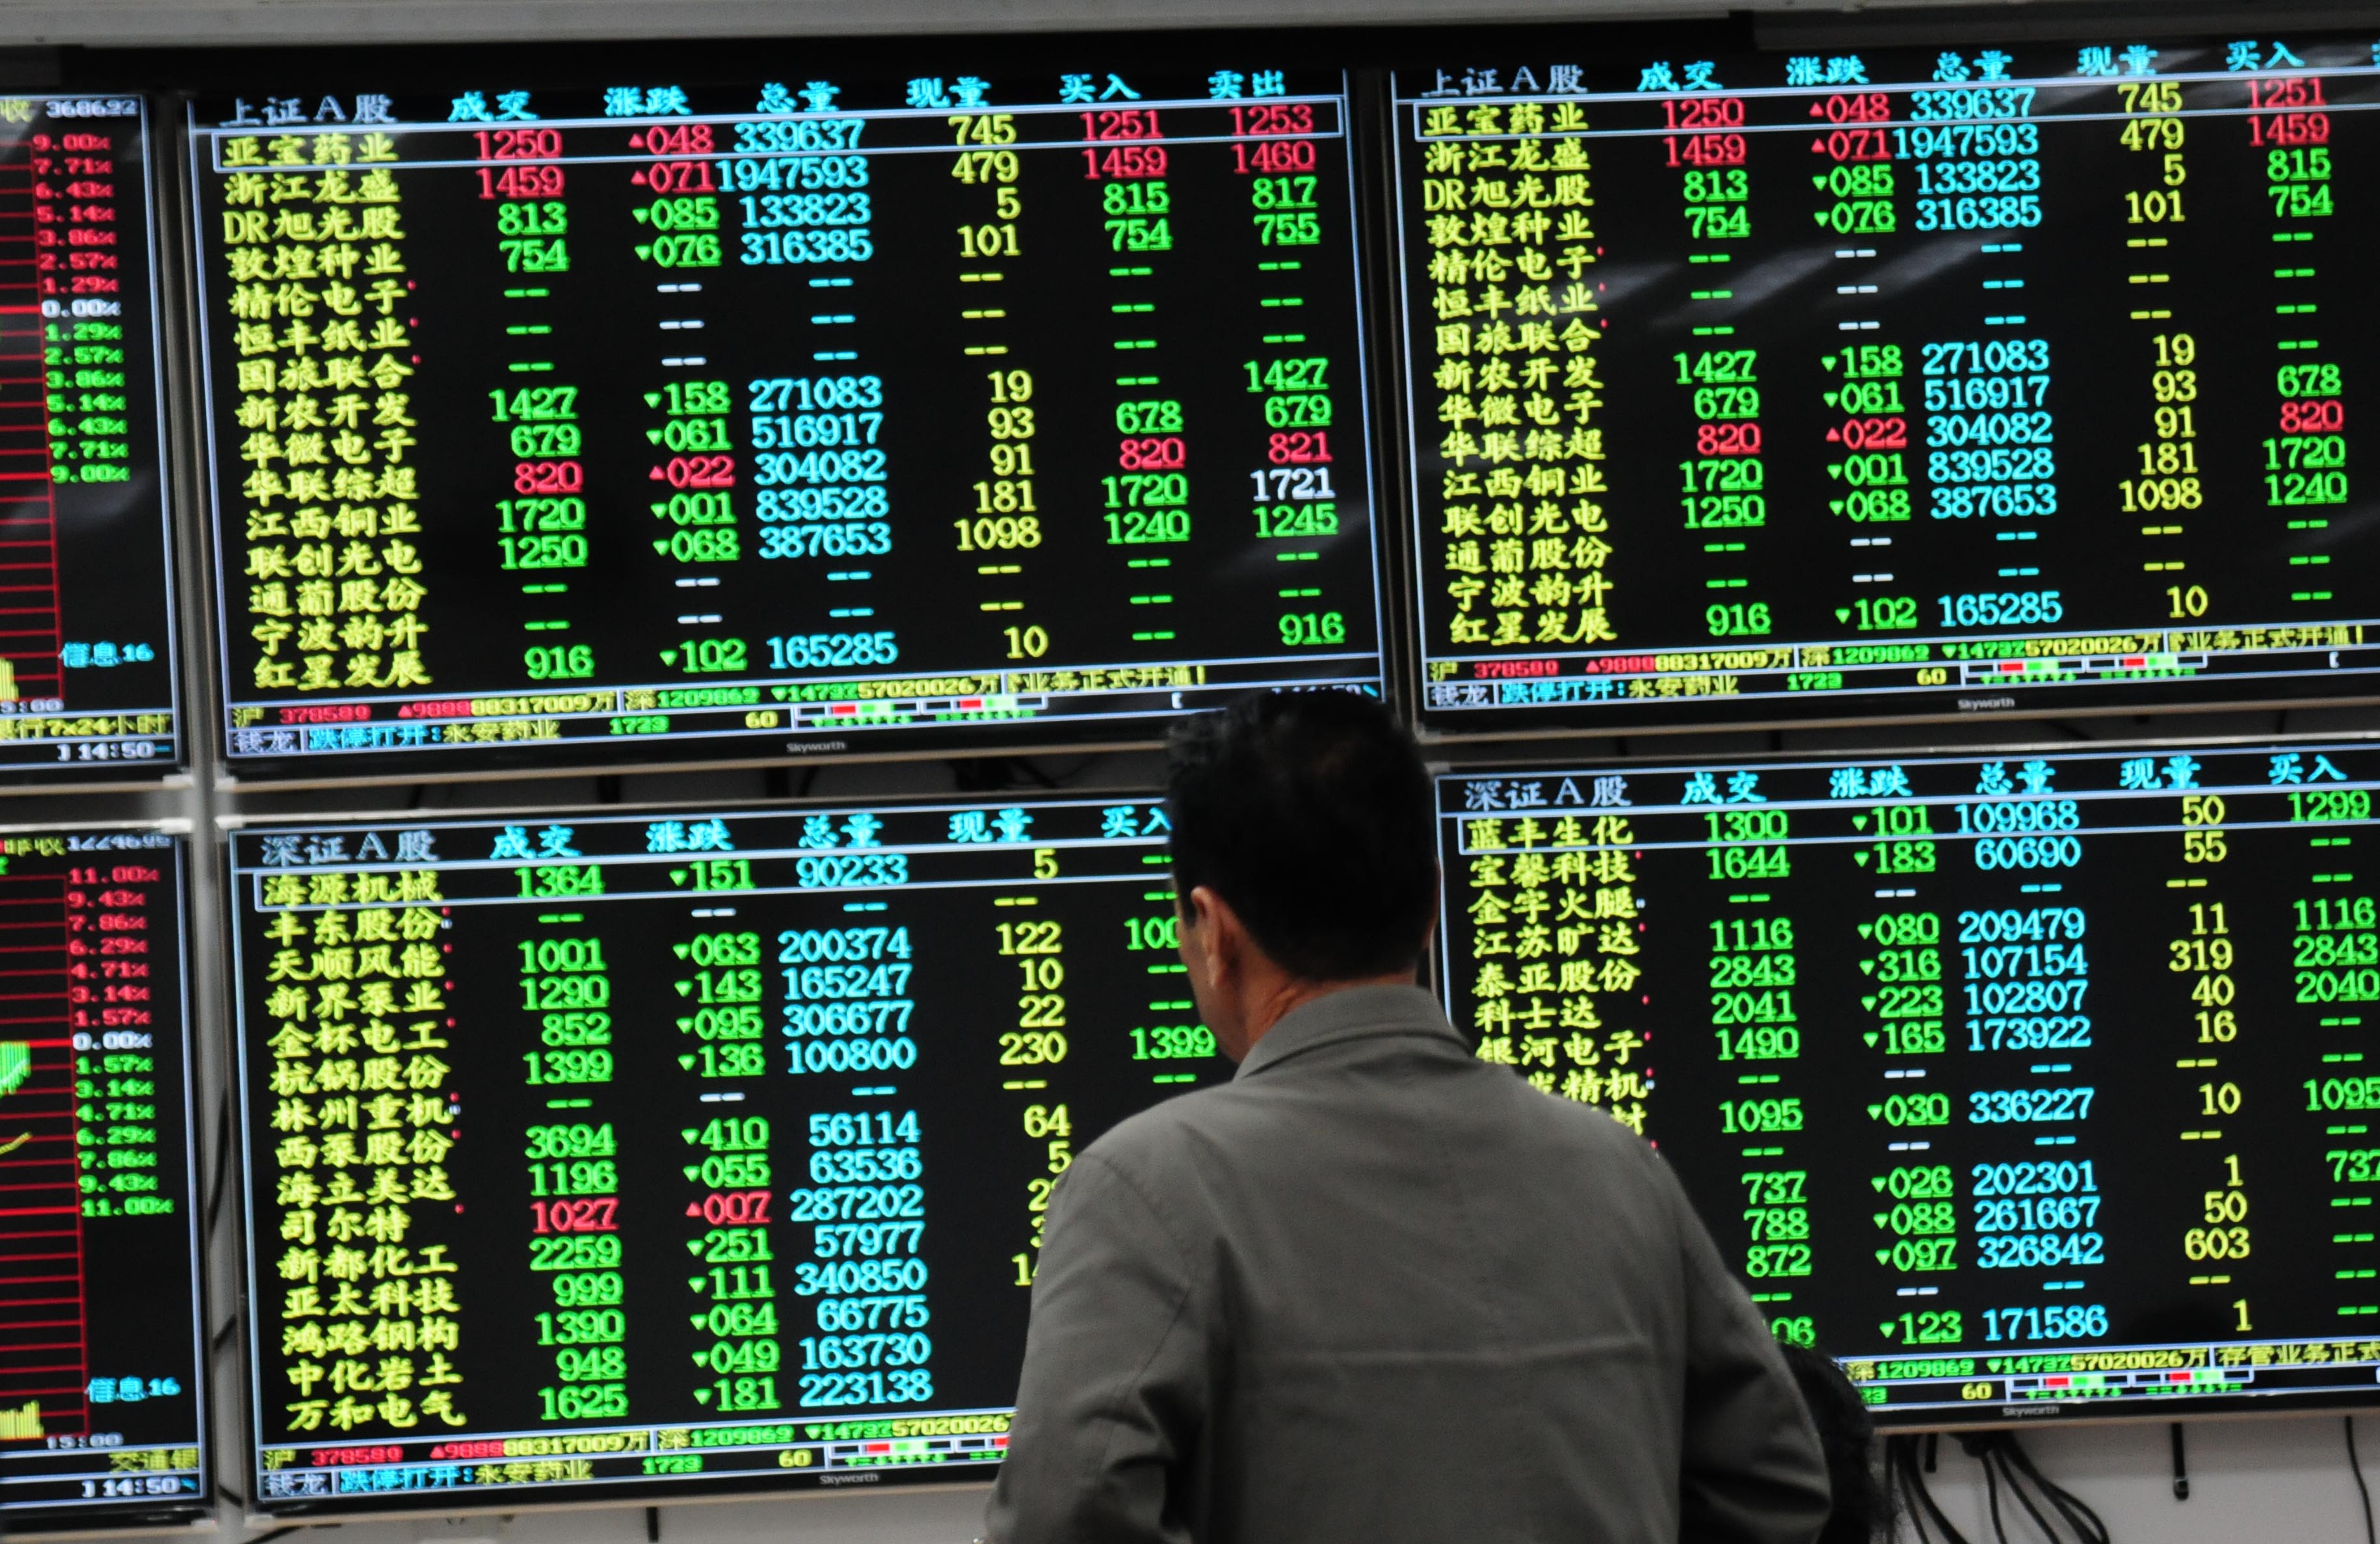 The China 50 ETF, which buys into shares of the 50 biggest companies listed in Shanghai, registered turnover of 24.9 billion yuan. Photo: Xinhua